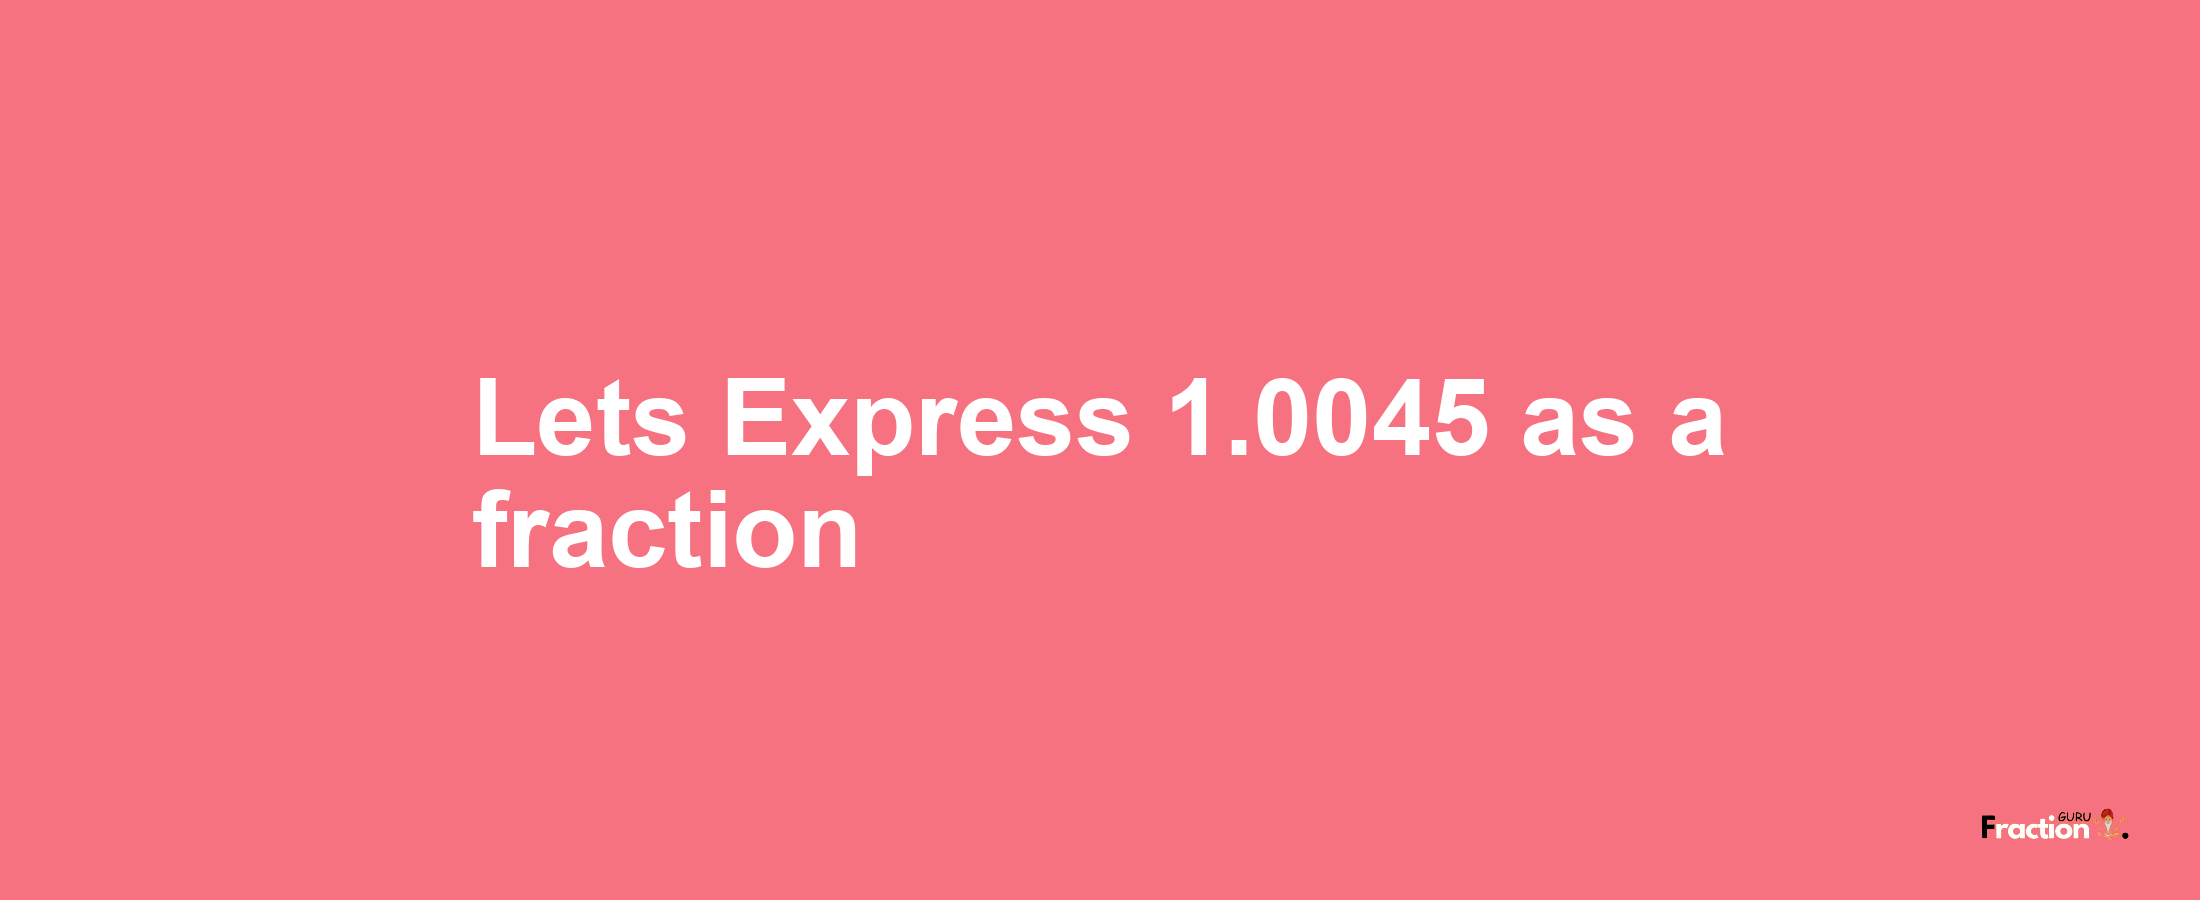 Lets Express 1.0045 as afraction